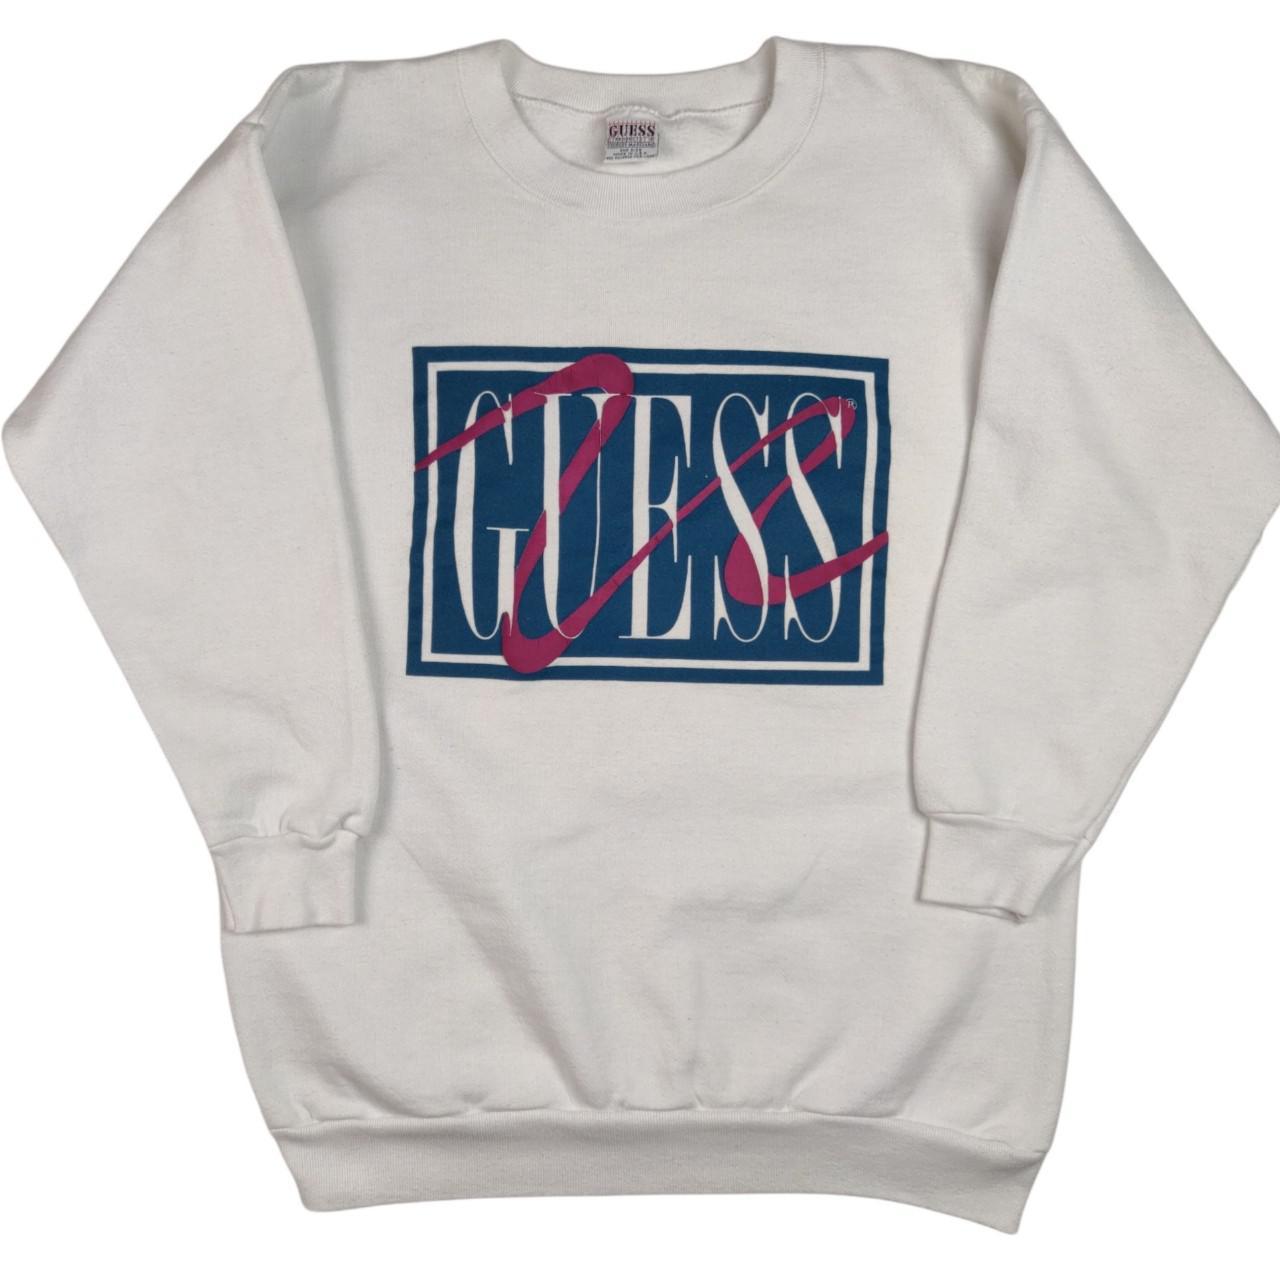 Guess Men's White and Pink Sweatshirt (2)